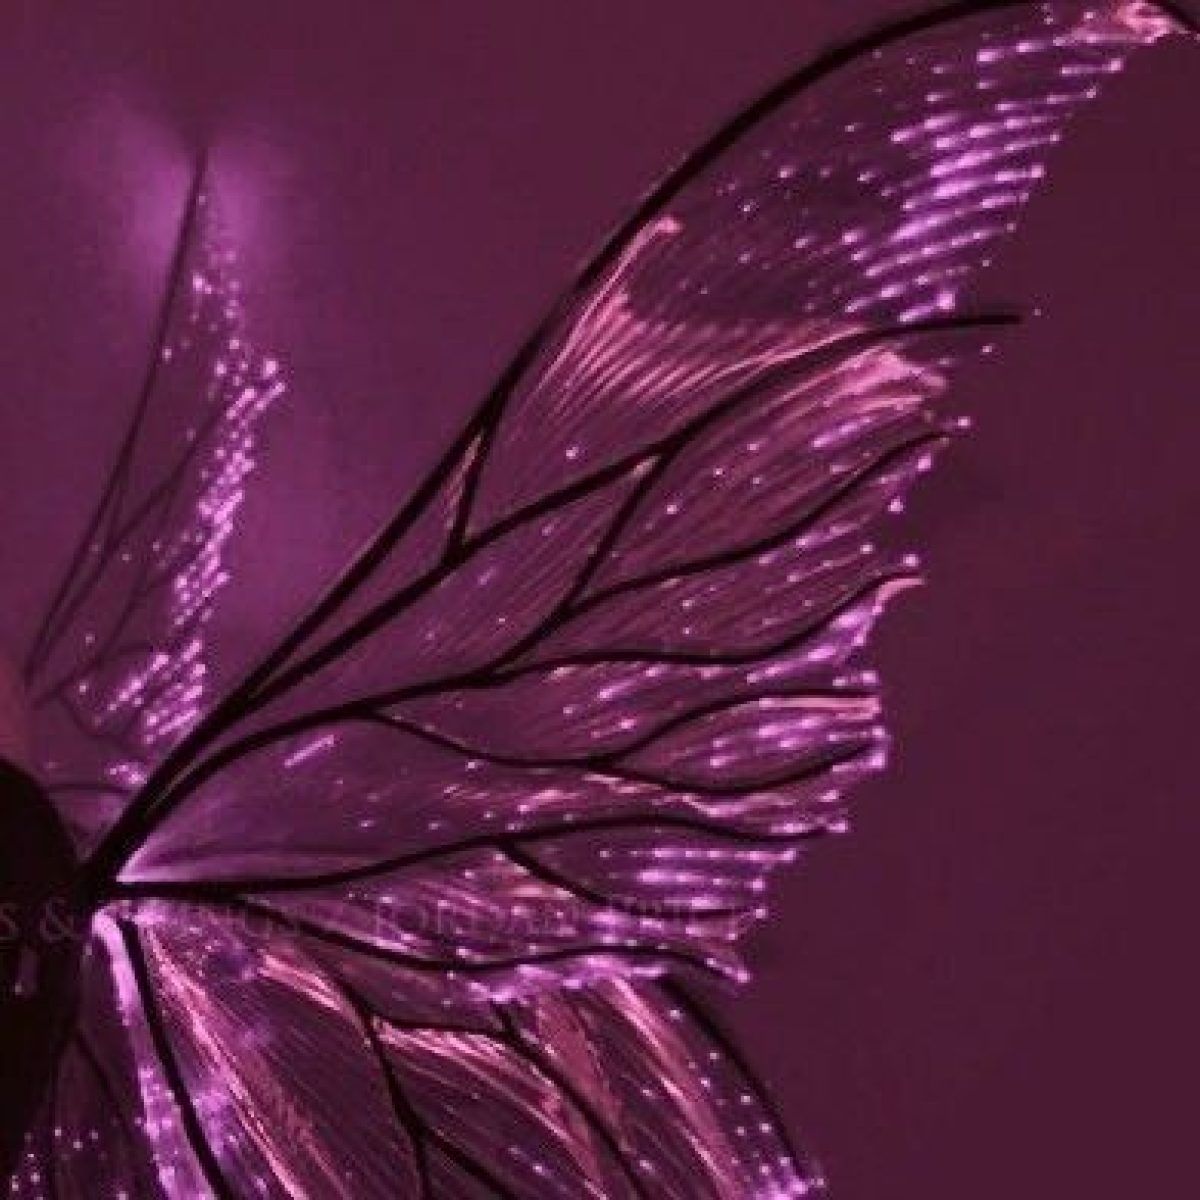 The wings of a fairy with fiber optics. - Wings